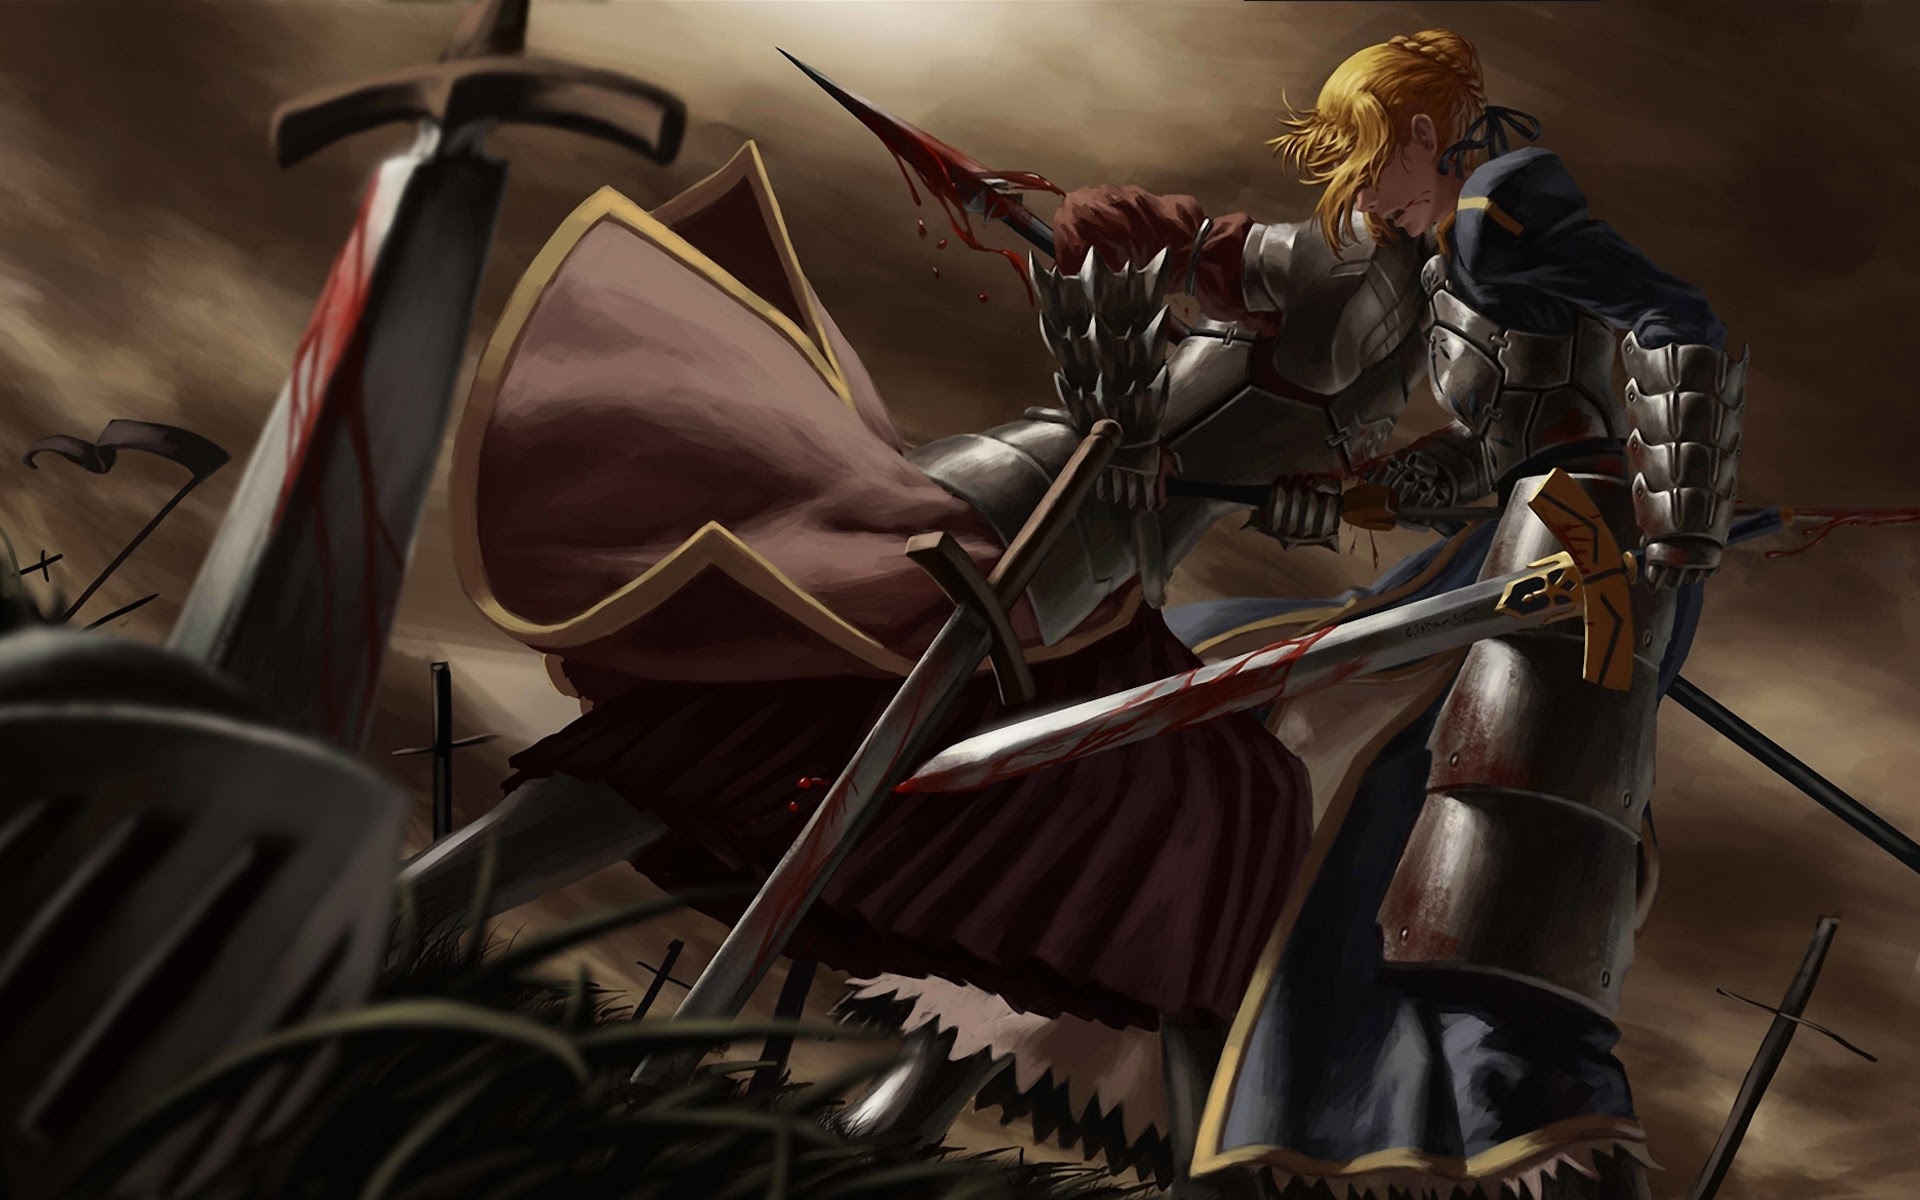 Saber Fighting Fate Stay Night Wallpaper Anime Blonde Armor Girl Sword